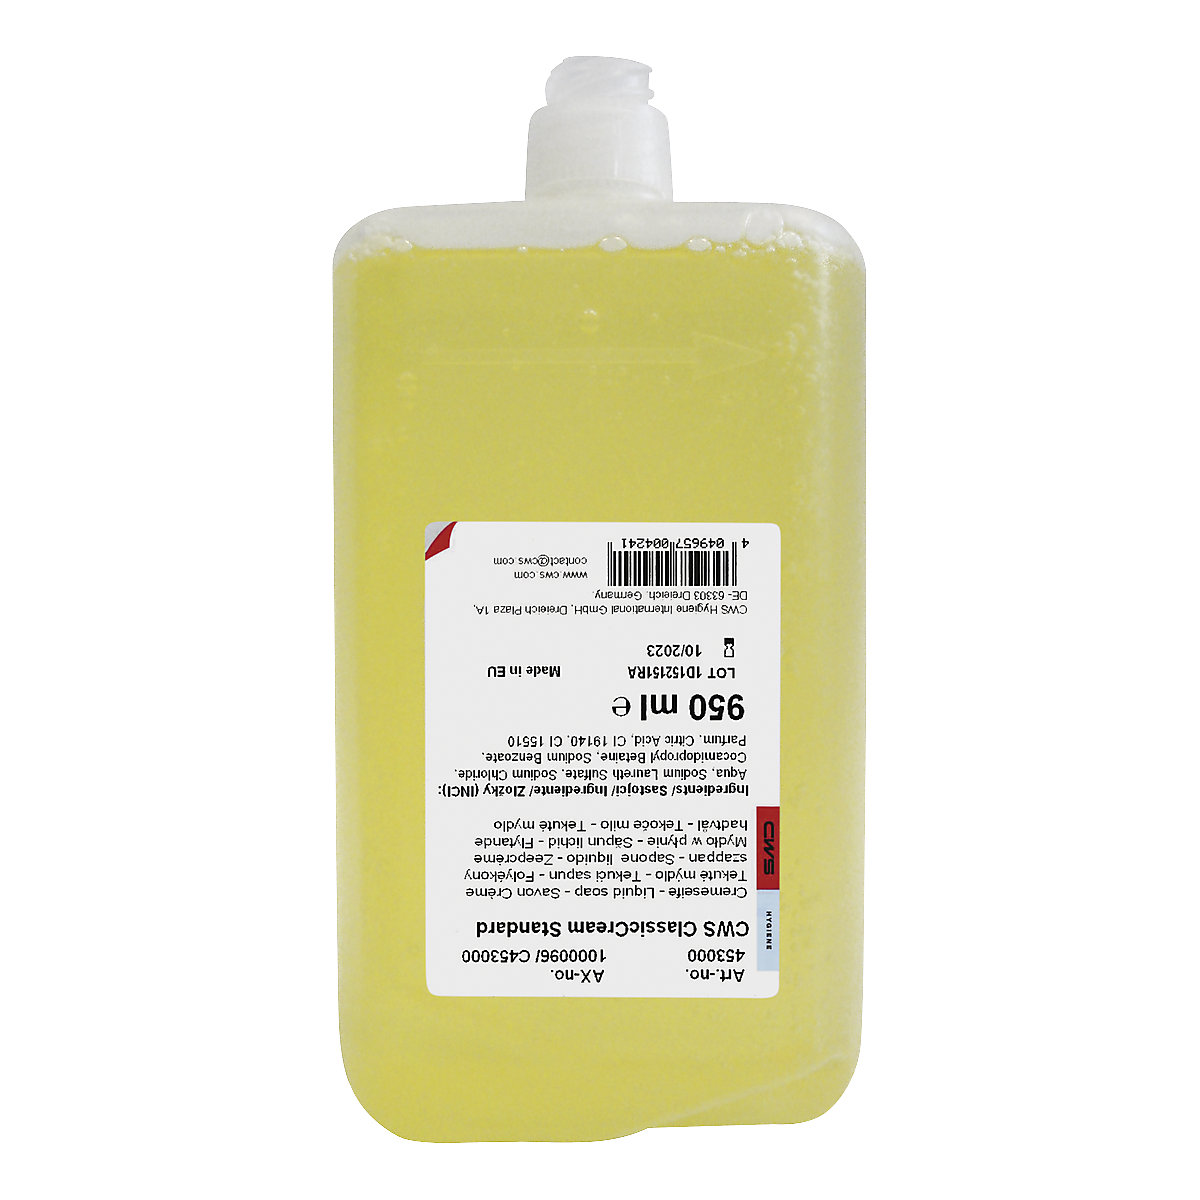 Classic Cream liquid soap – CWS, pack of 12 bottles, 1 l each, yellow, with citrus fragrance-3